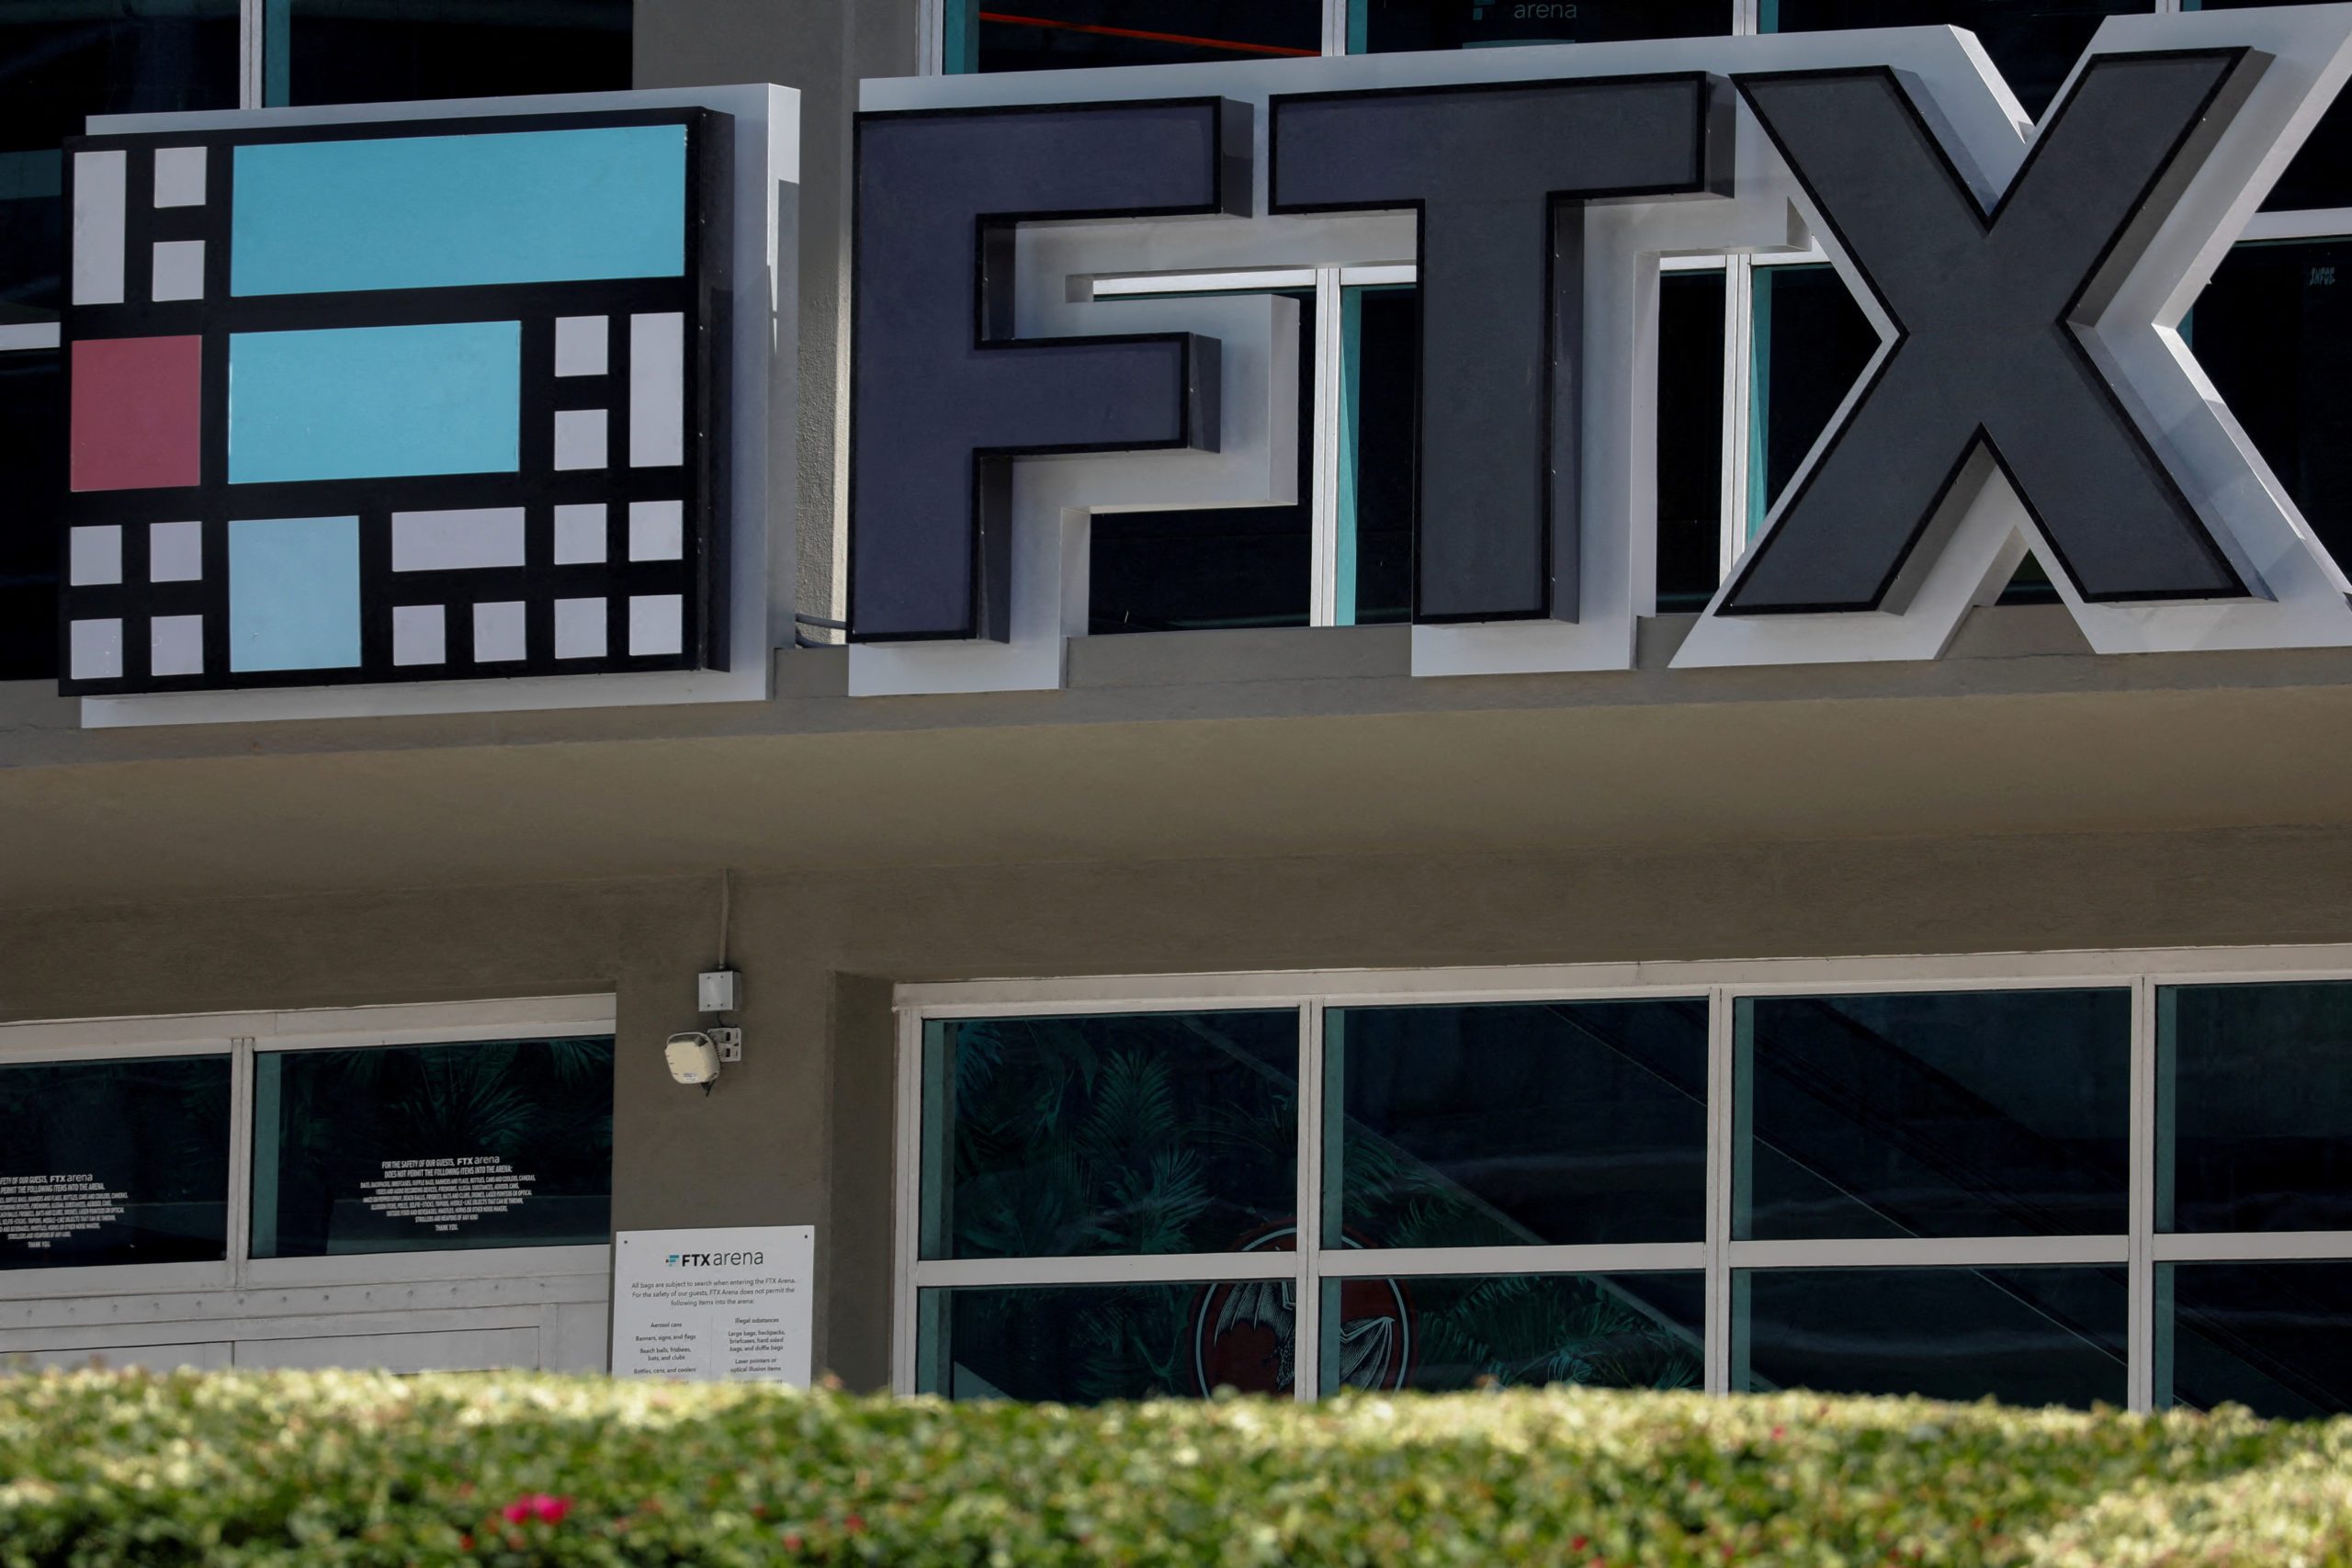 Collapsed crypto bourse FTX owes $3.1b to its top 50 creditors